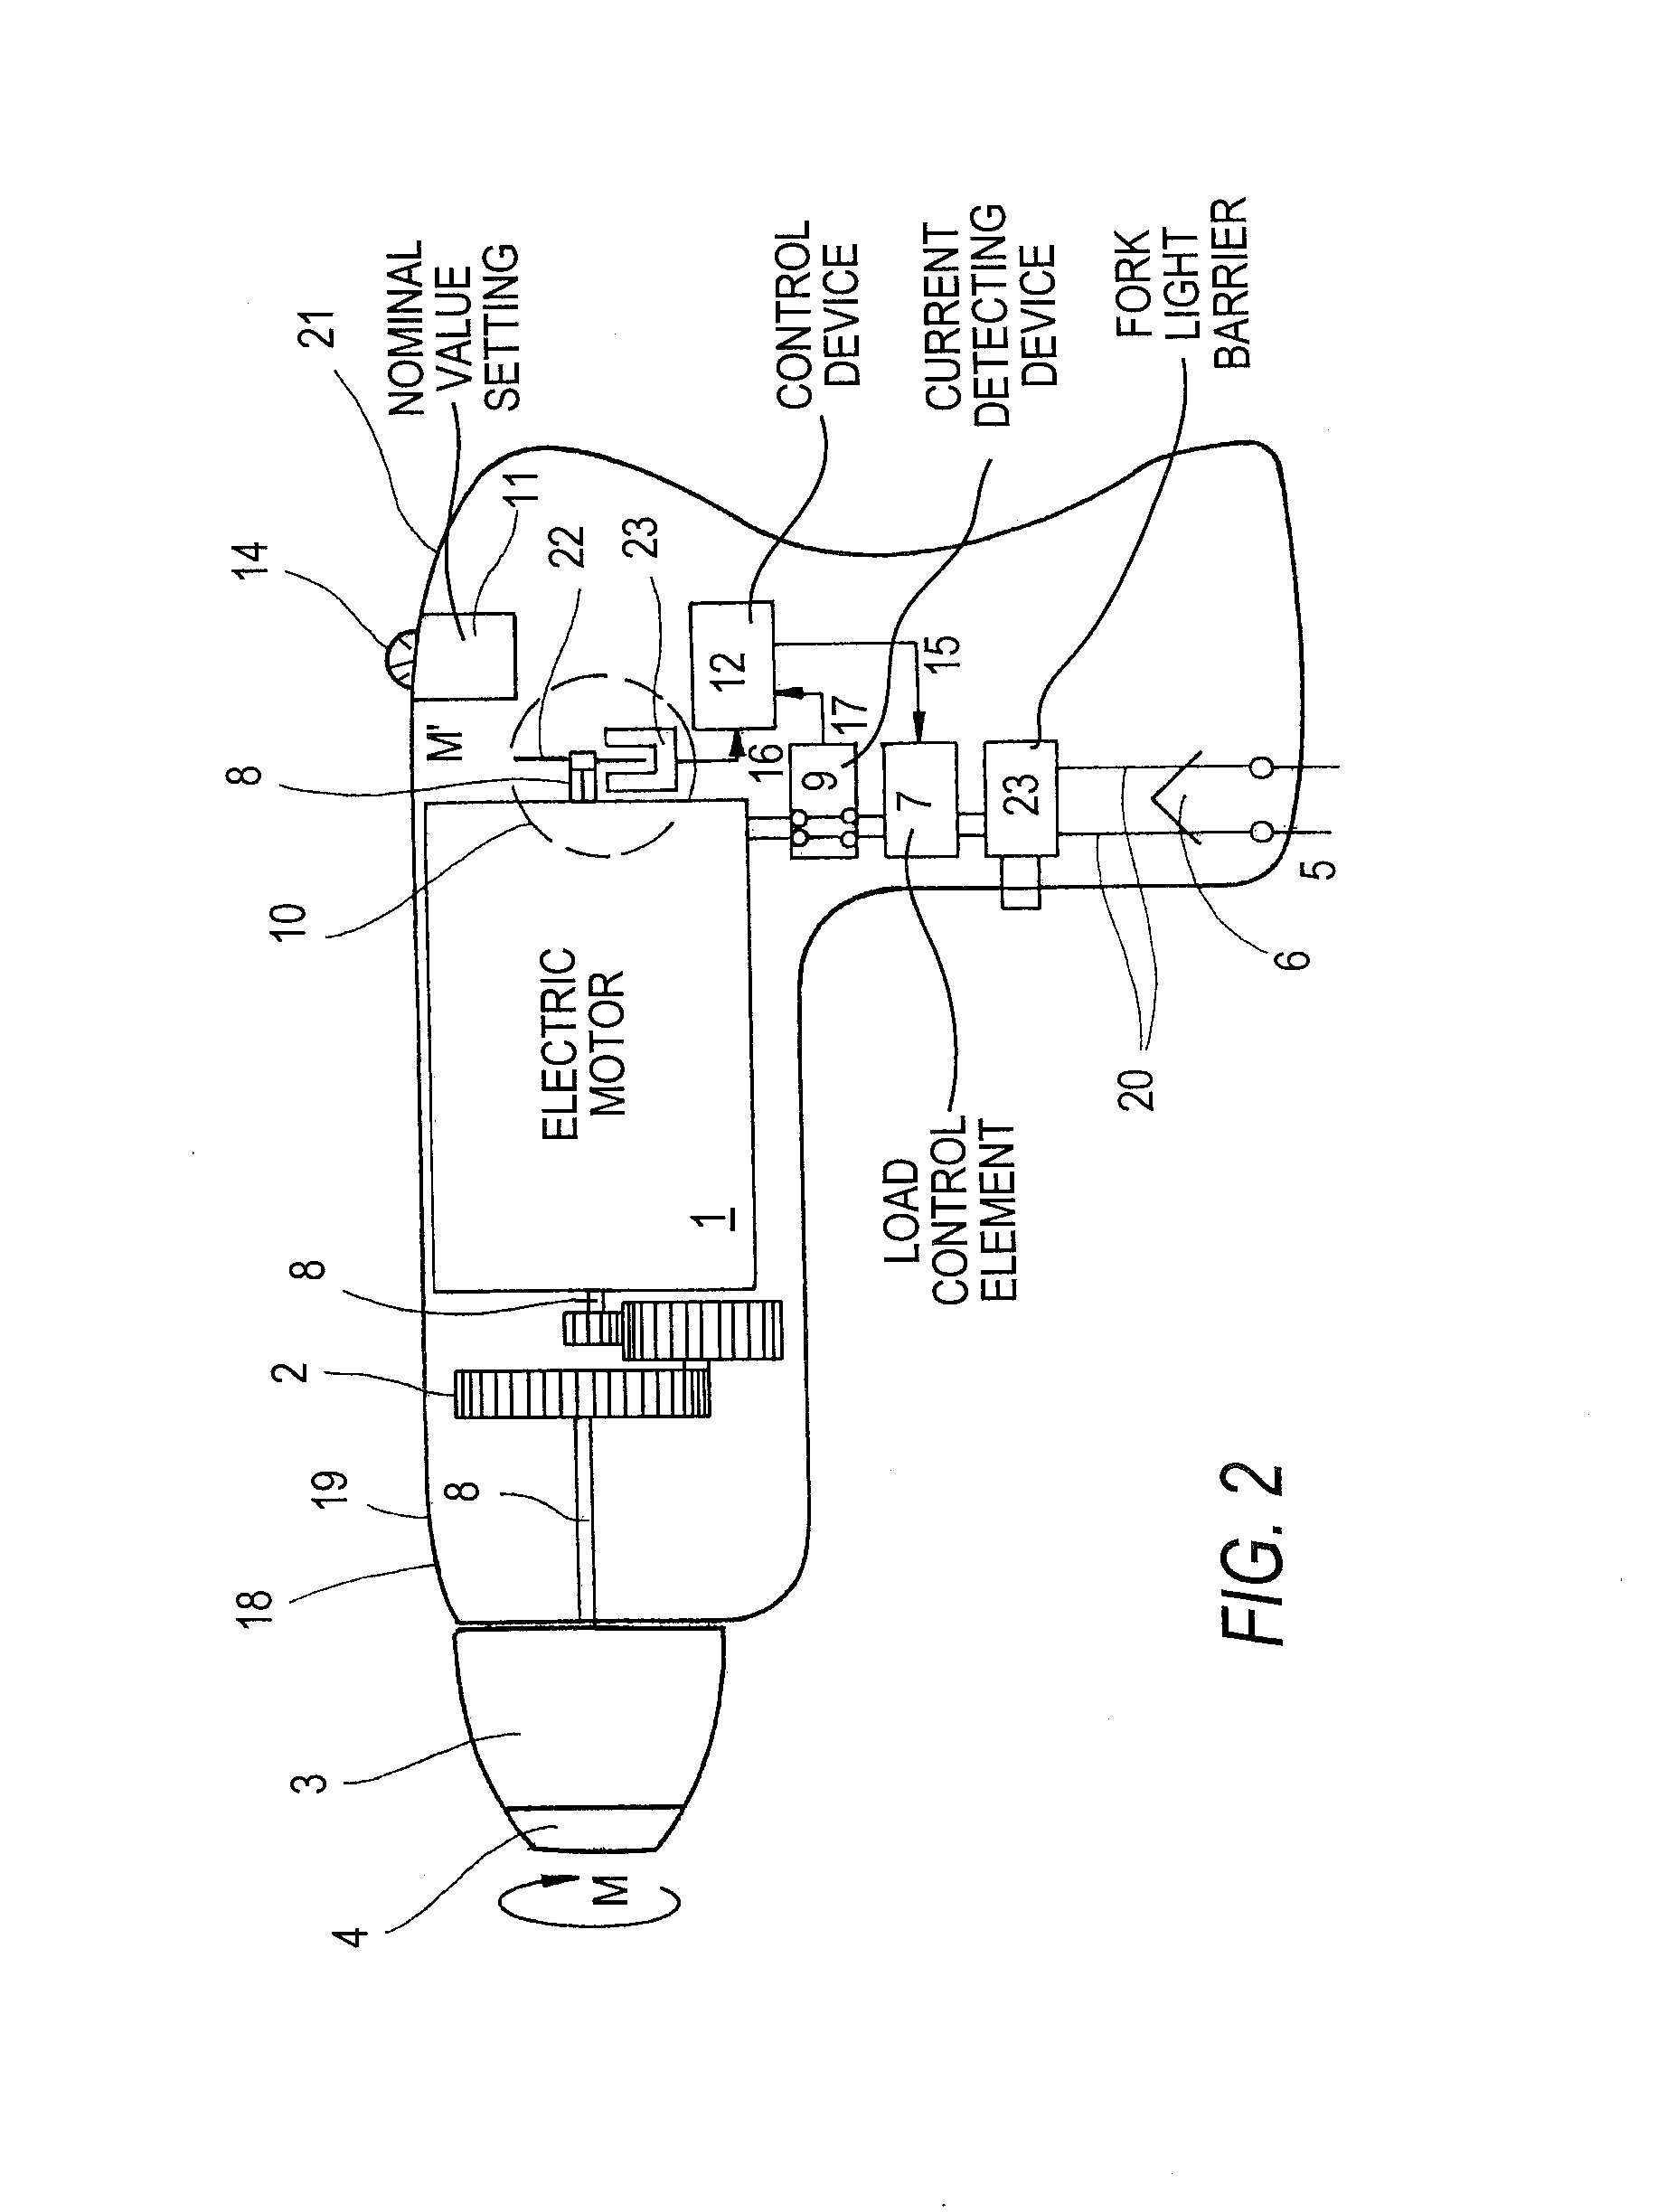 Torque limiting device for an electric motor